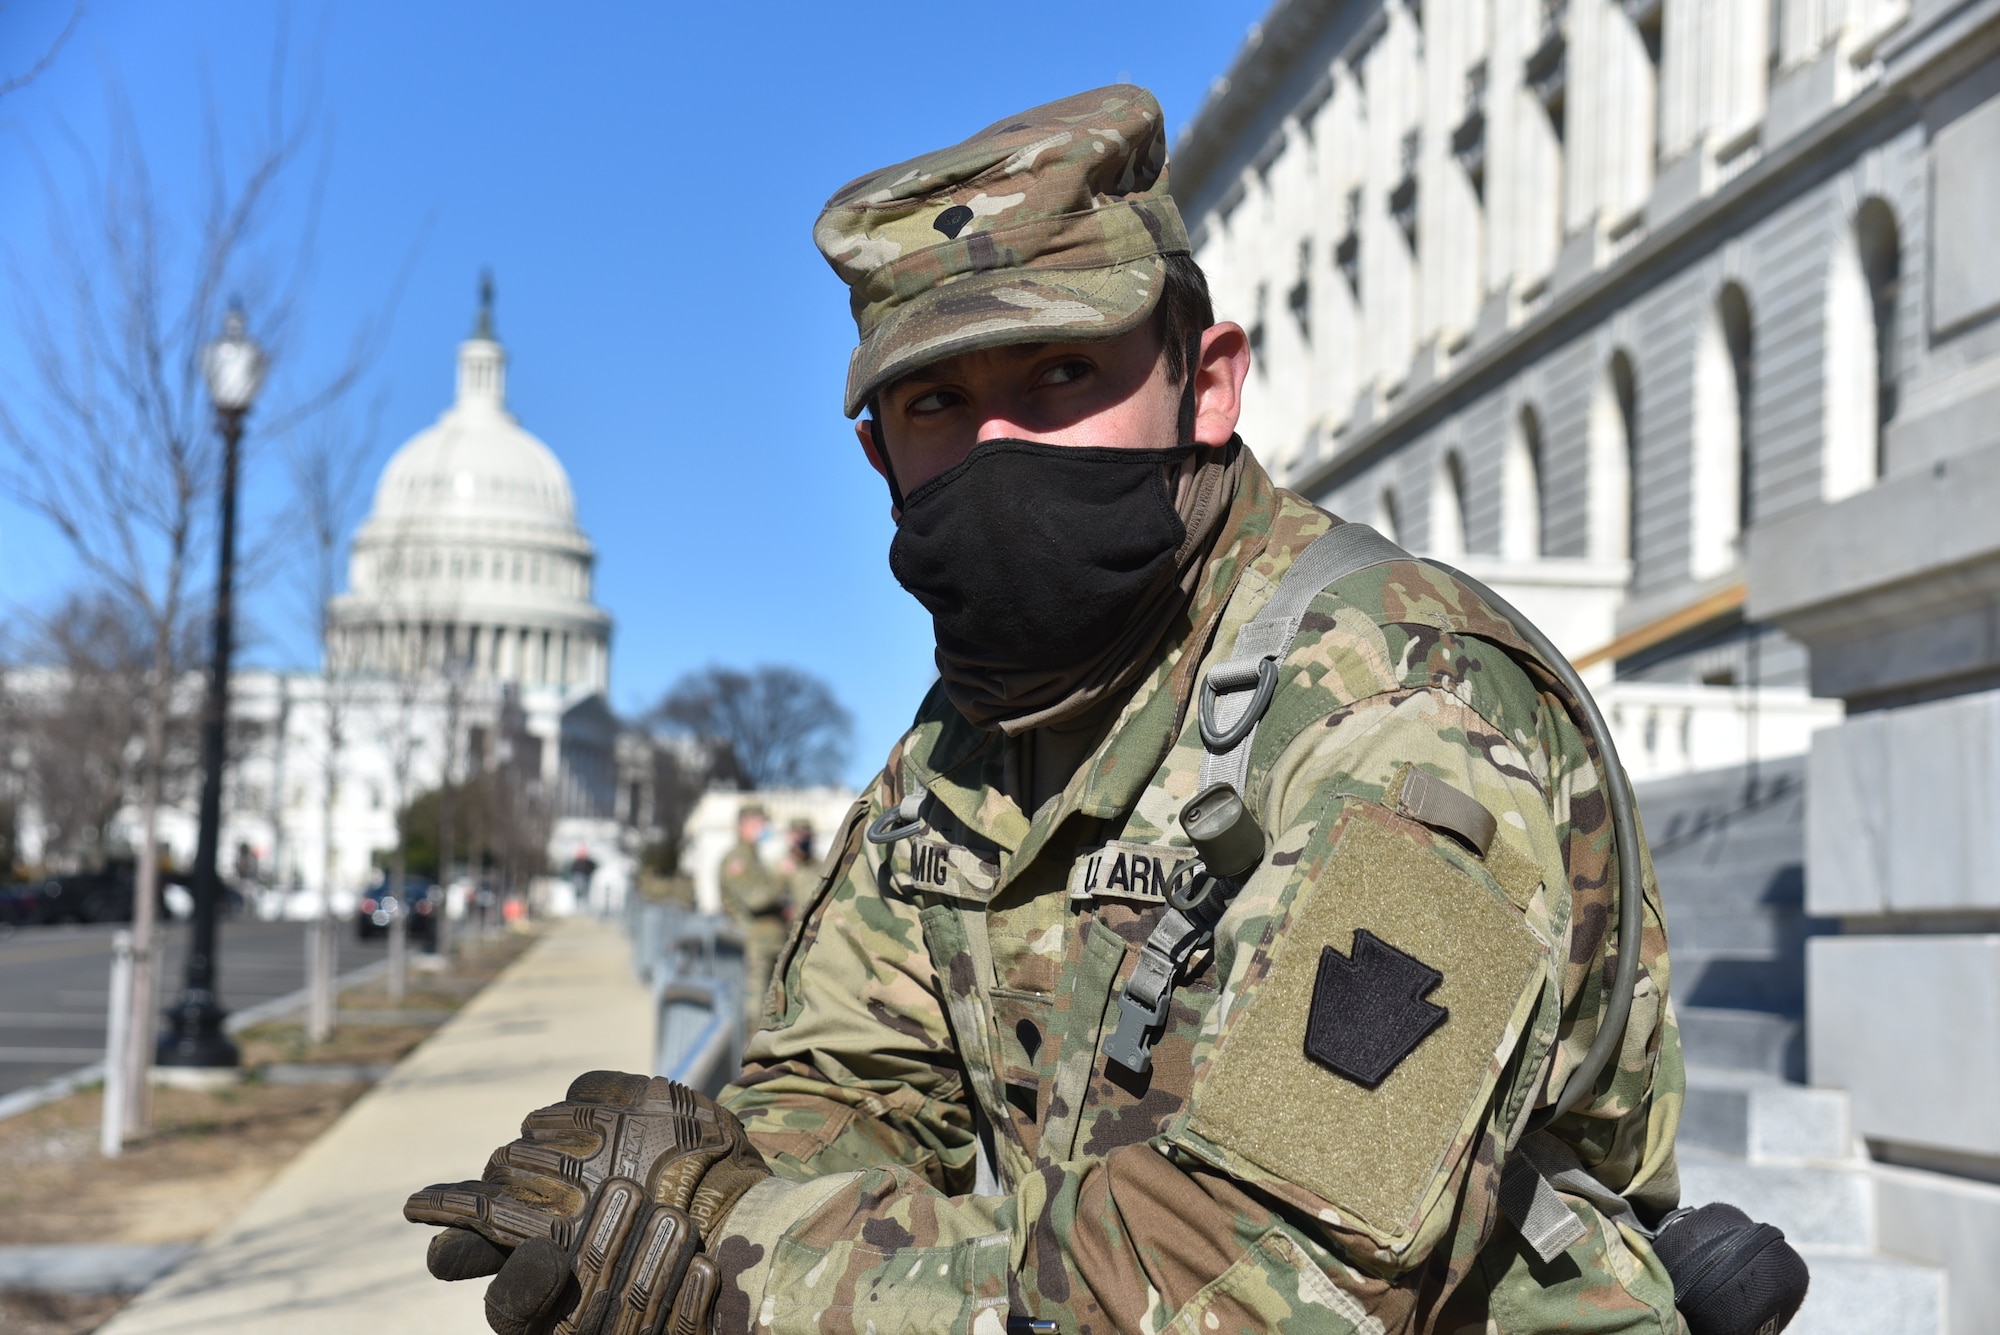 Spc. Kevin Romig,  2nd Squadron, 104th Cavalry Regiment, 56th Stryker Brigade Combat Team, Pennsylvania National Guard, from Reading, Pa., helps maintain a security perimeter around the U.S. Capitol in Washington, D.C., on Jan. 10, 2021.